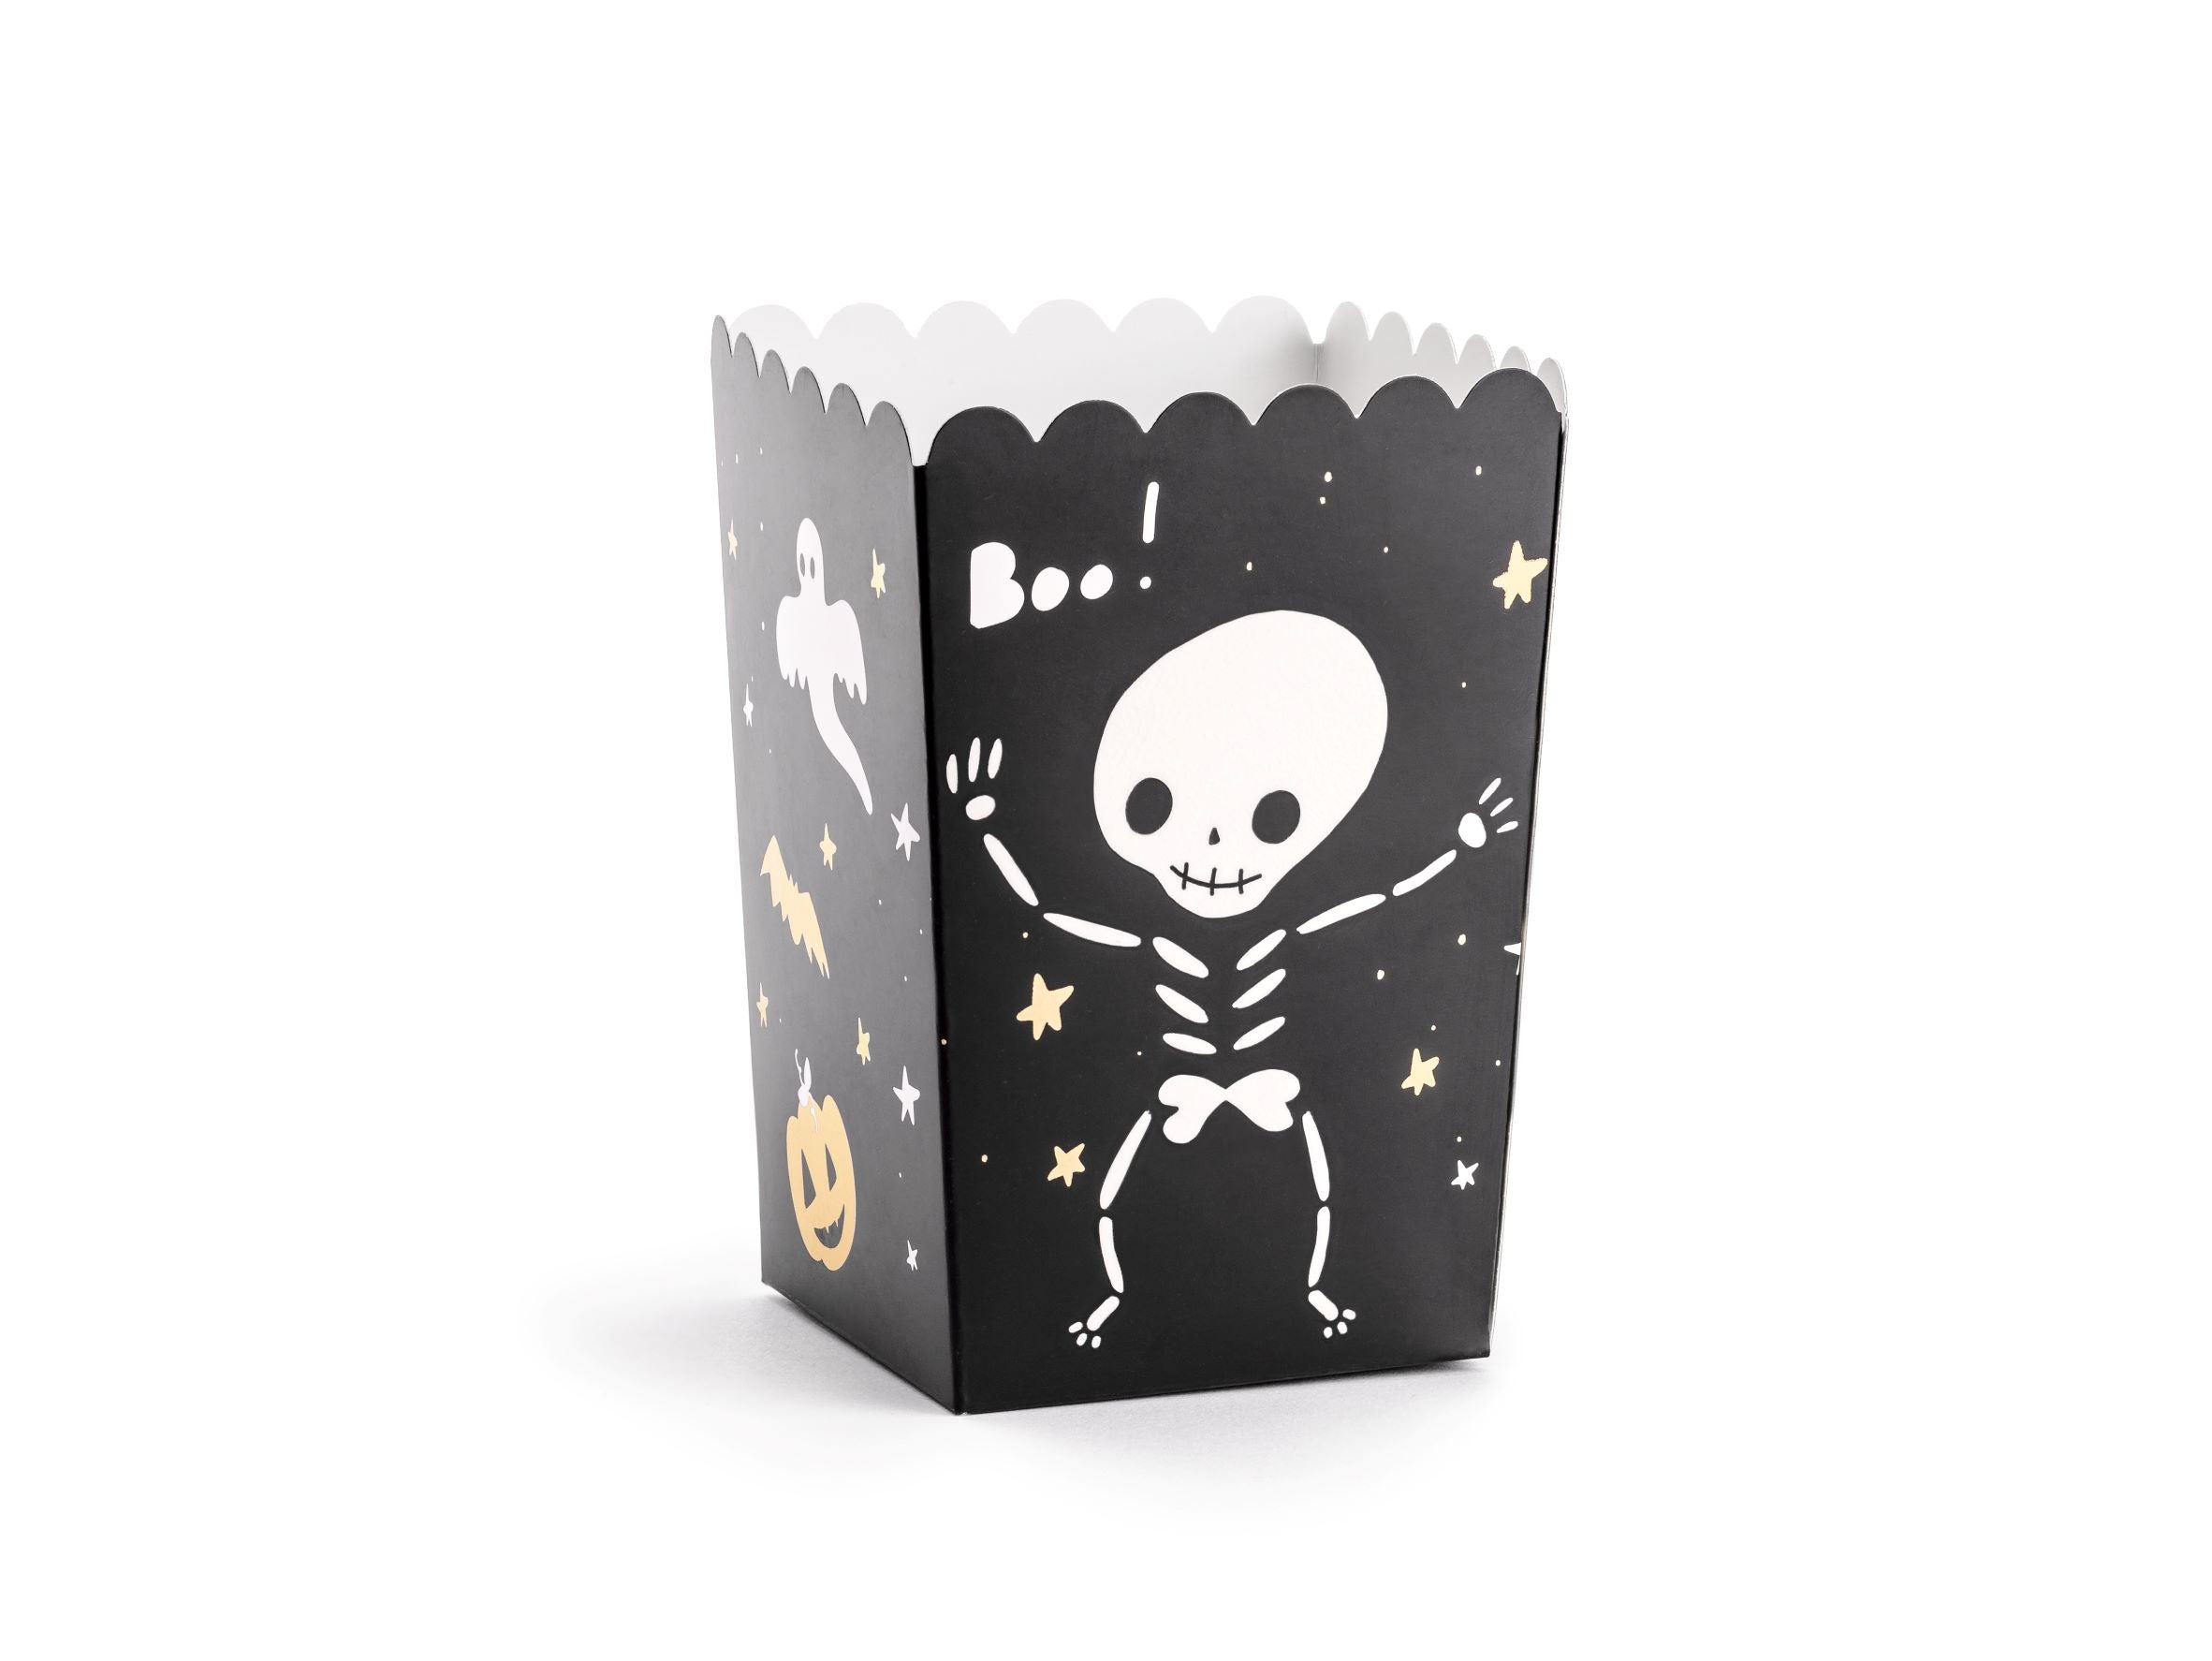 Boo Halloween Popcorn Boxes Pack of 6